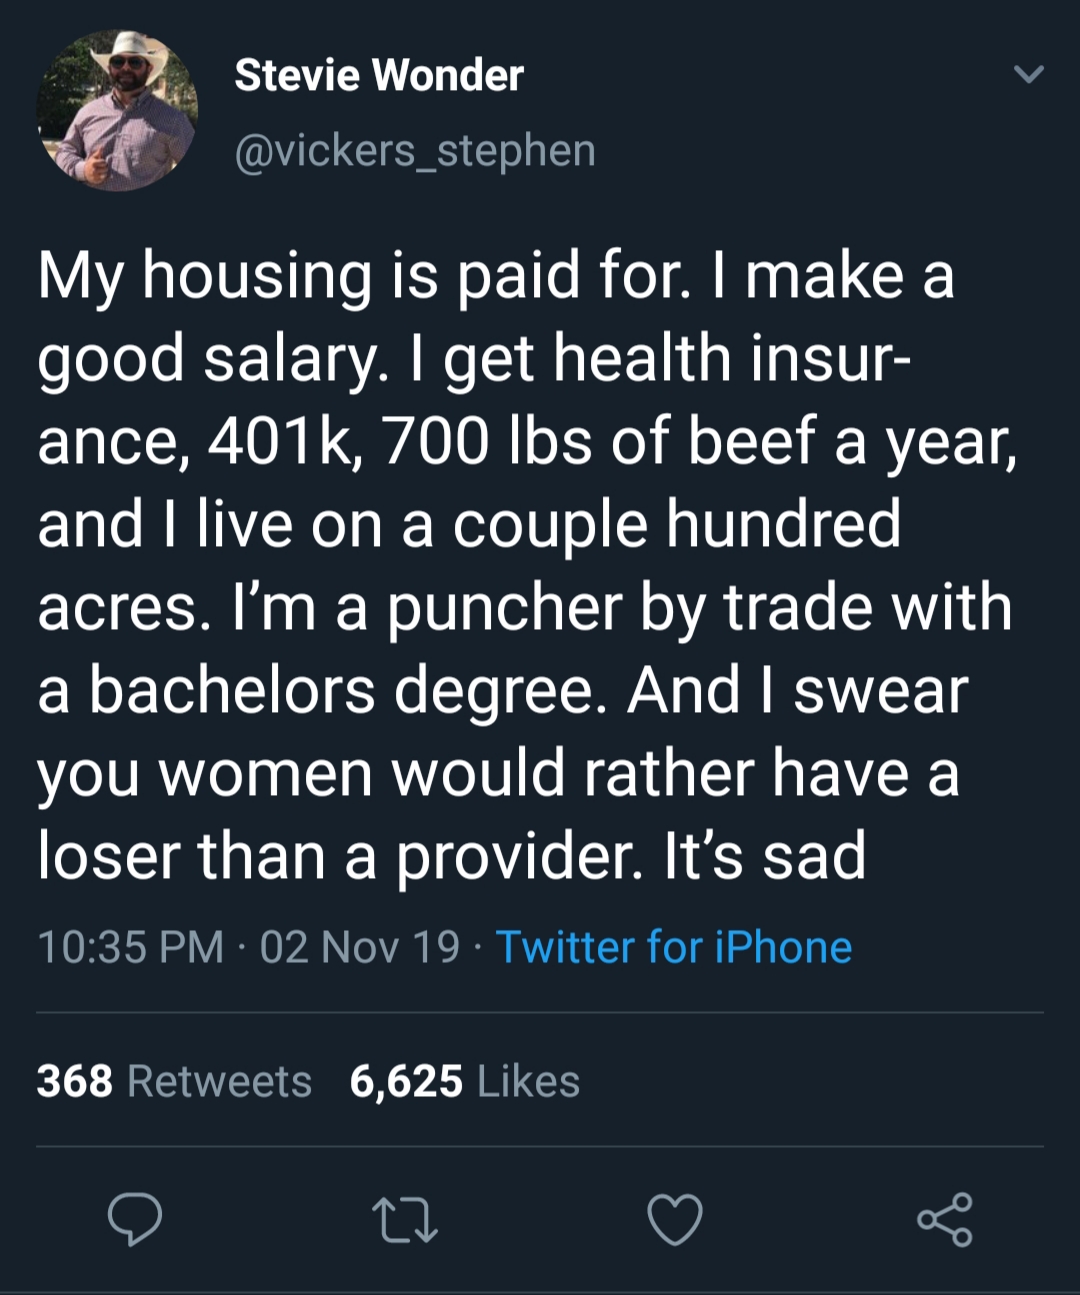 rant - women's aid federation of england - Stevie Wonder My housing is paid for. I make a good salary. I get health insur ance, , 700 lbs of beef a year, and I live on a couple hundred acres. I'm a puncher by trade with a bachelors degree. And I swear you